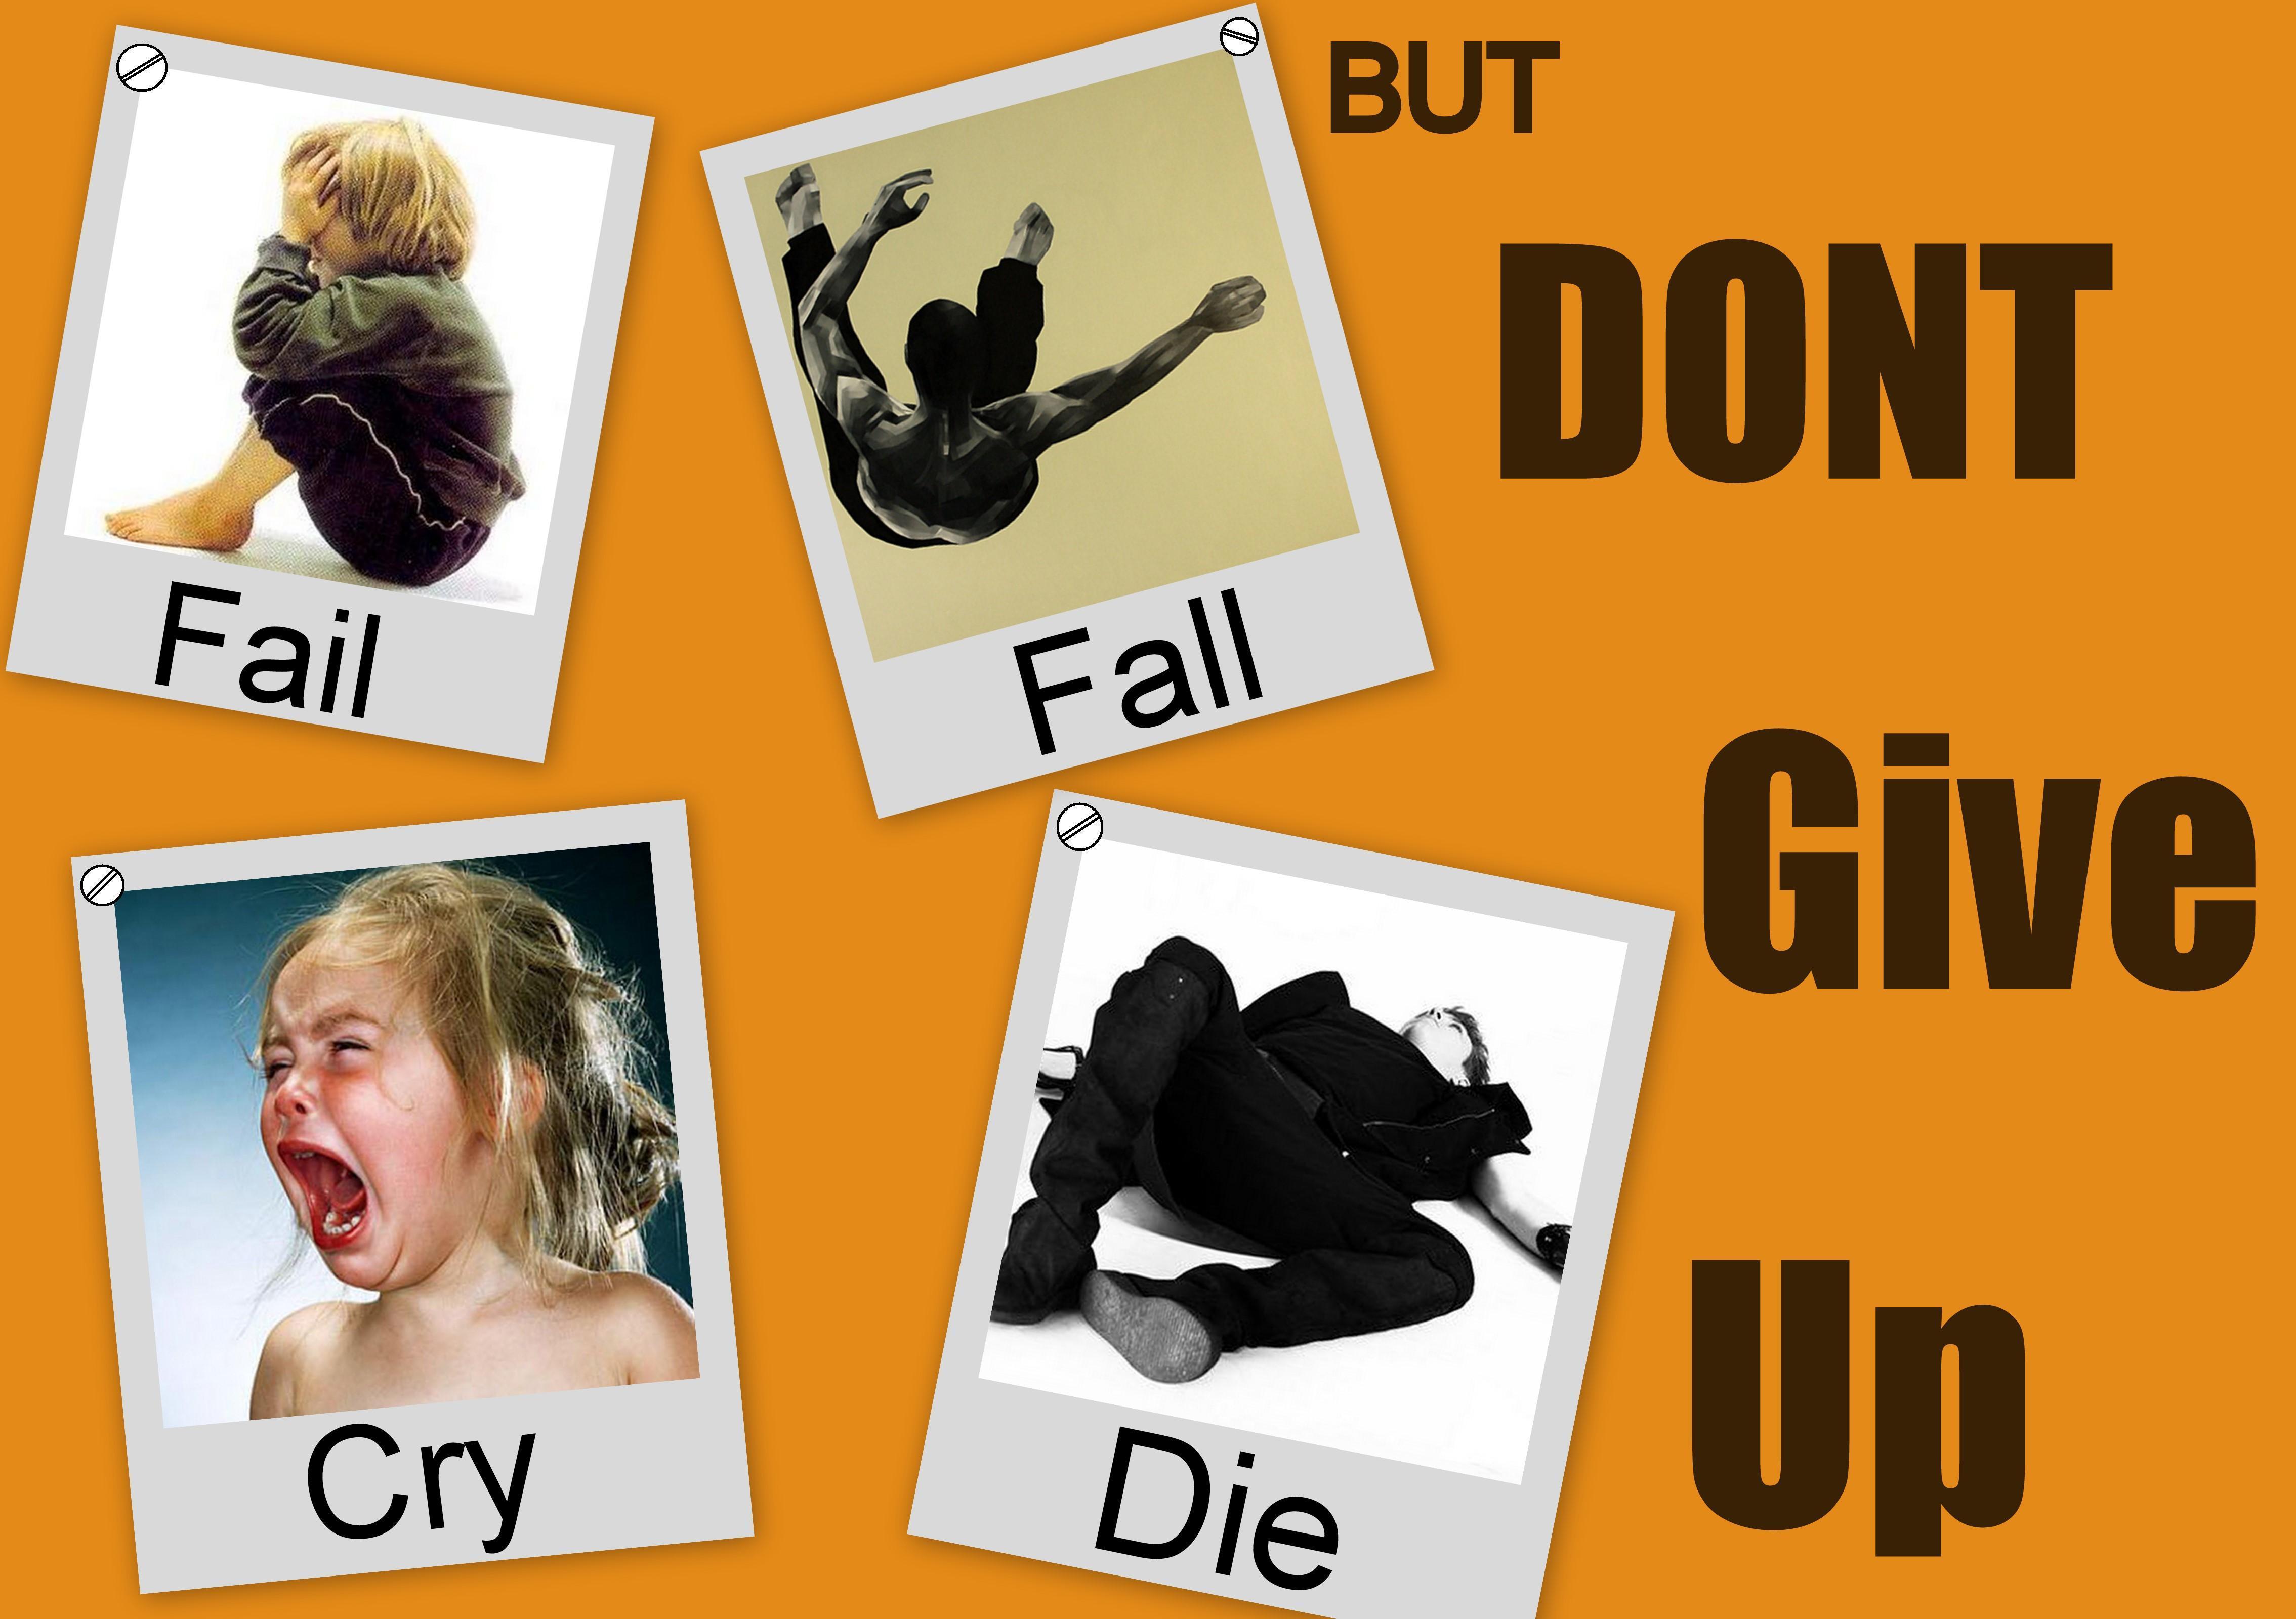 Don't Give Up Motivational wallpaper, Fail Fall Cry even Die. Dont